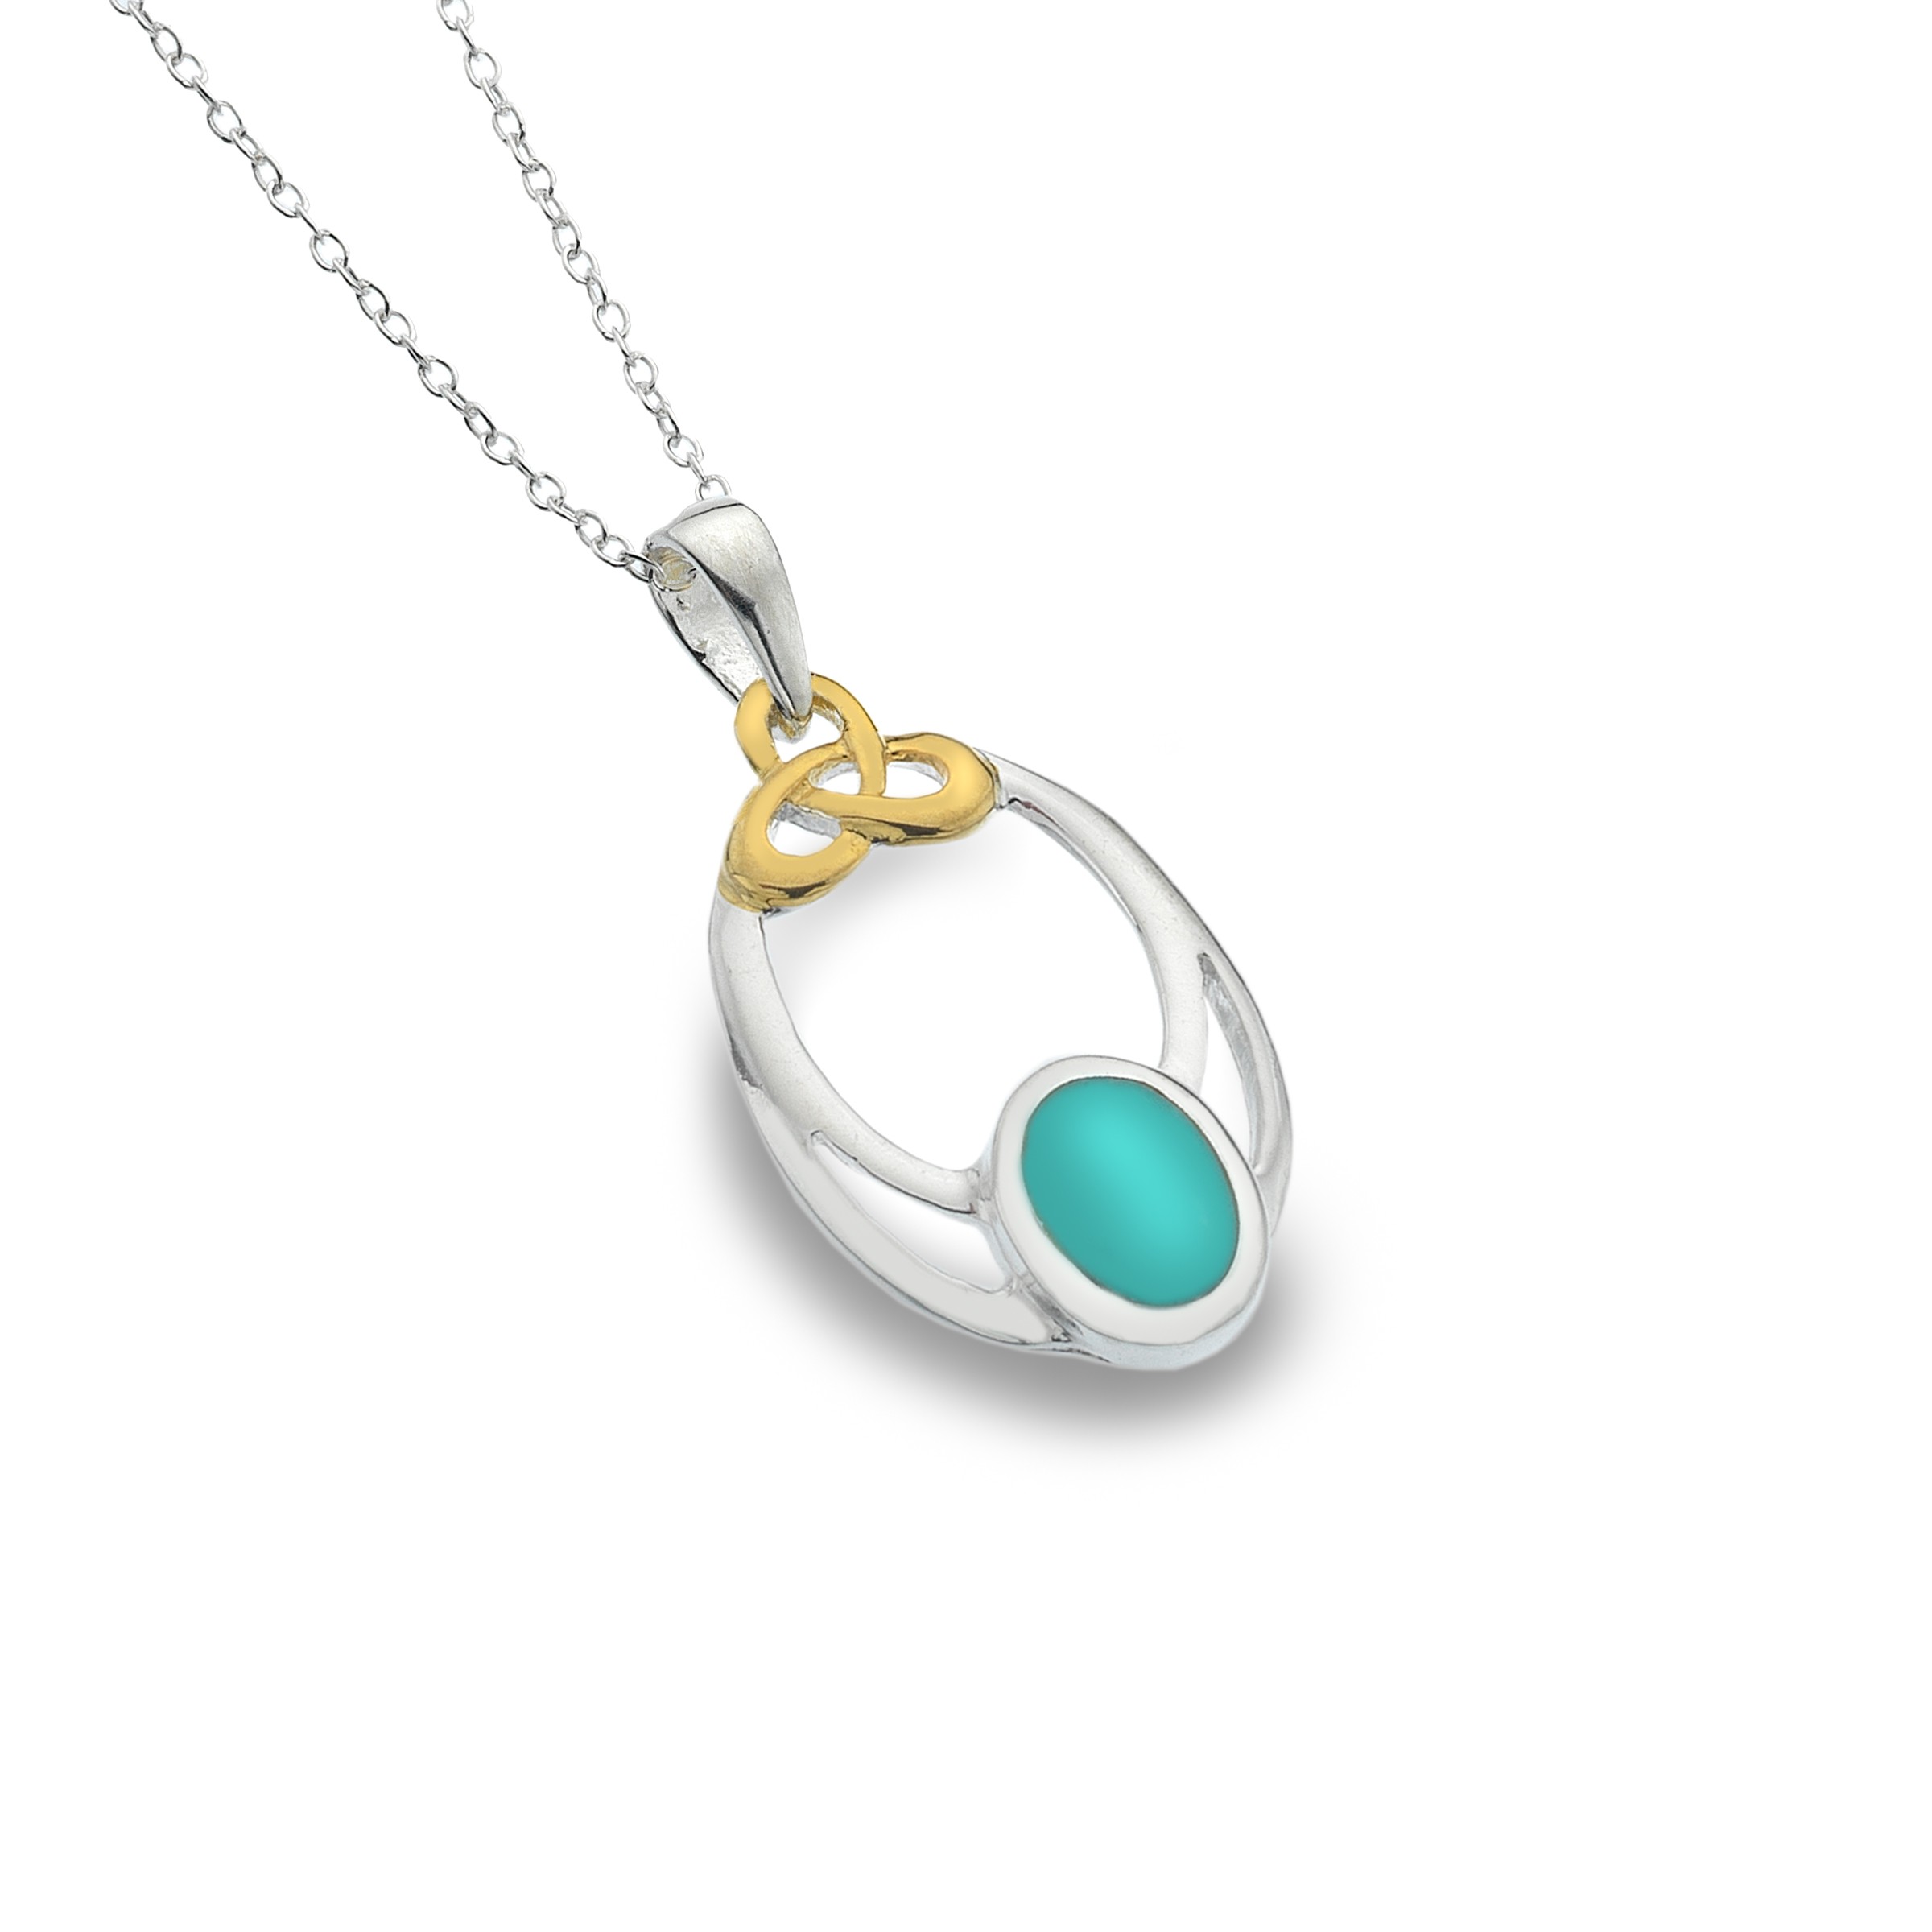 Celtic Knot & Turquoise Oval Sterling Silver Pendant Necklace